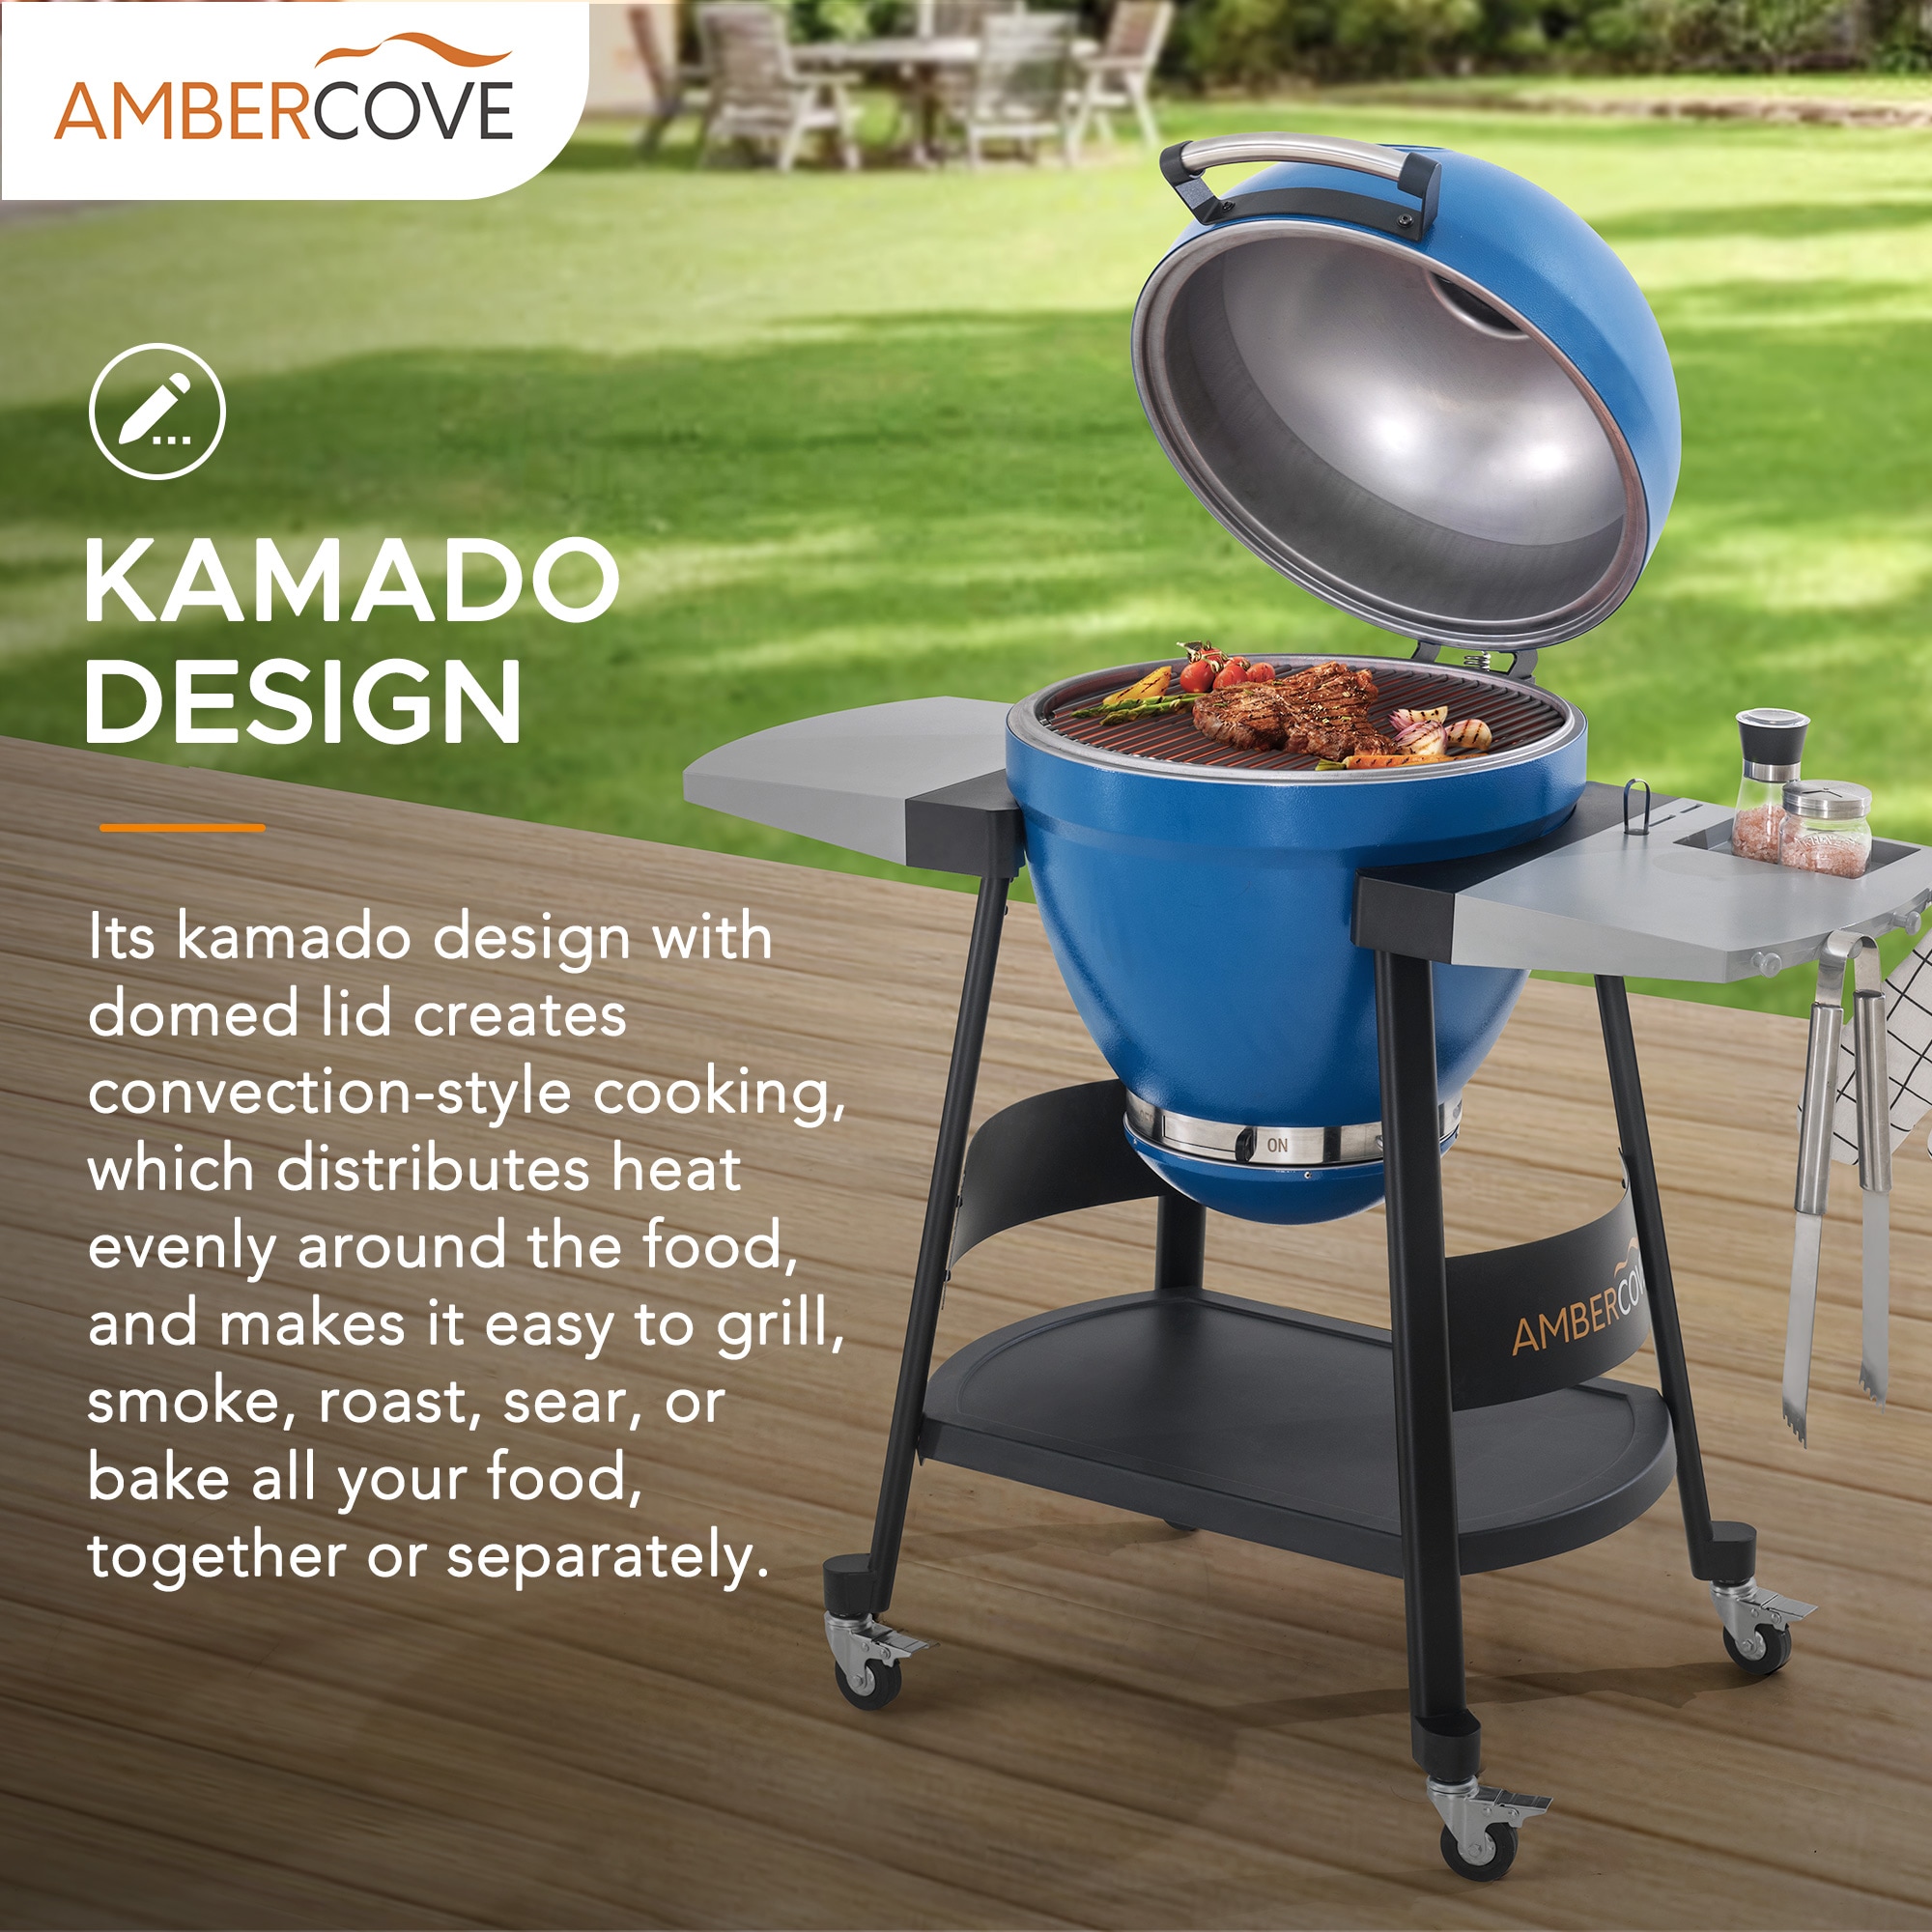 Hanover 19 Ceramic Kamado Grill with Cart, Shelves and Accessory Package,  Desert